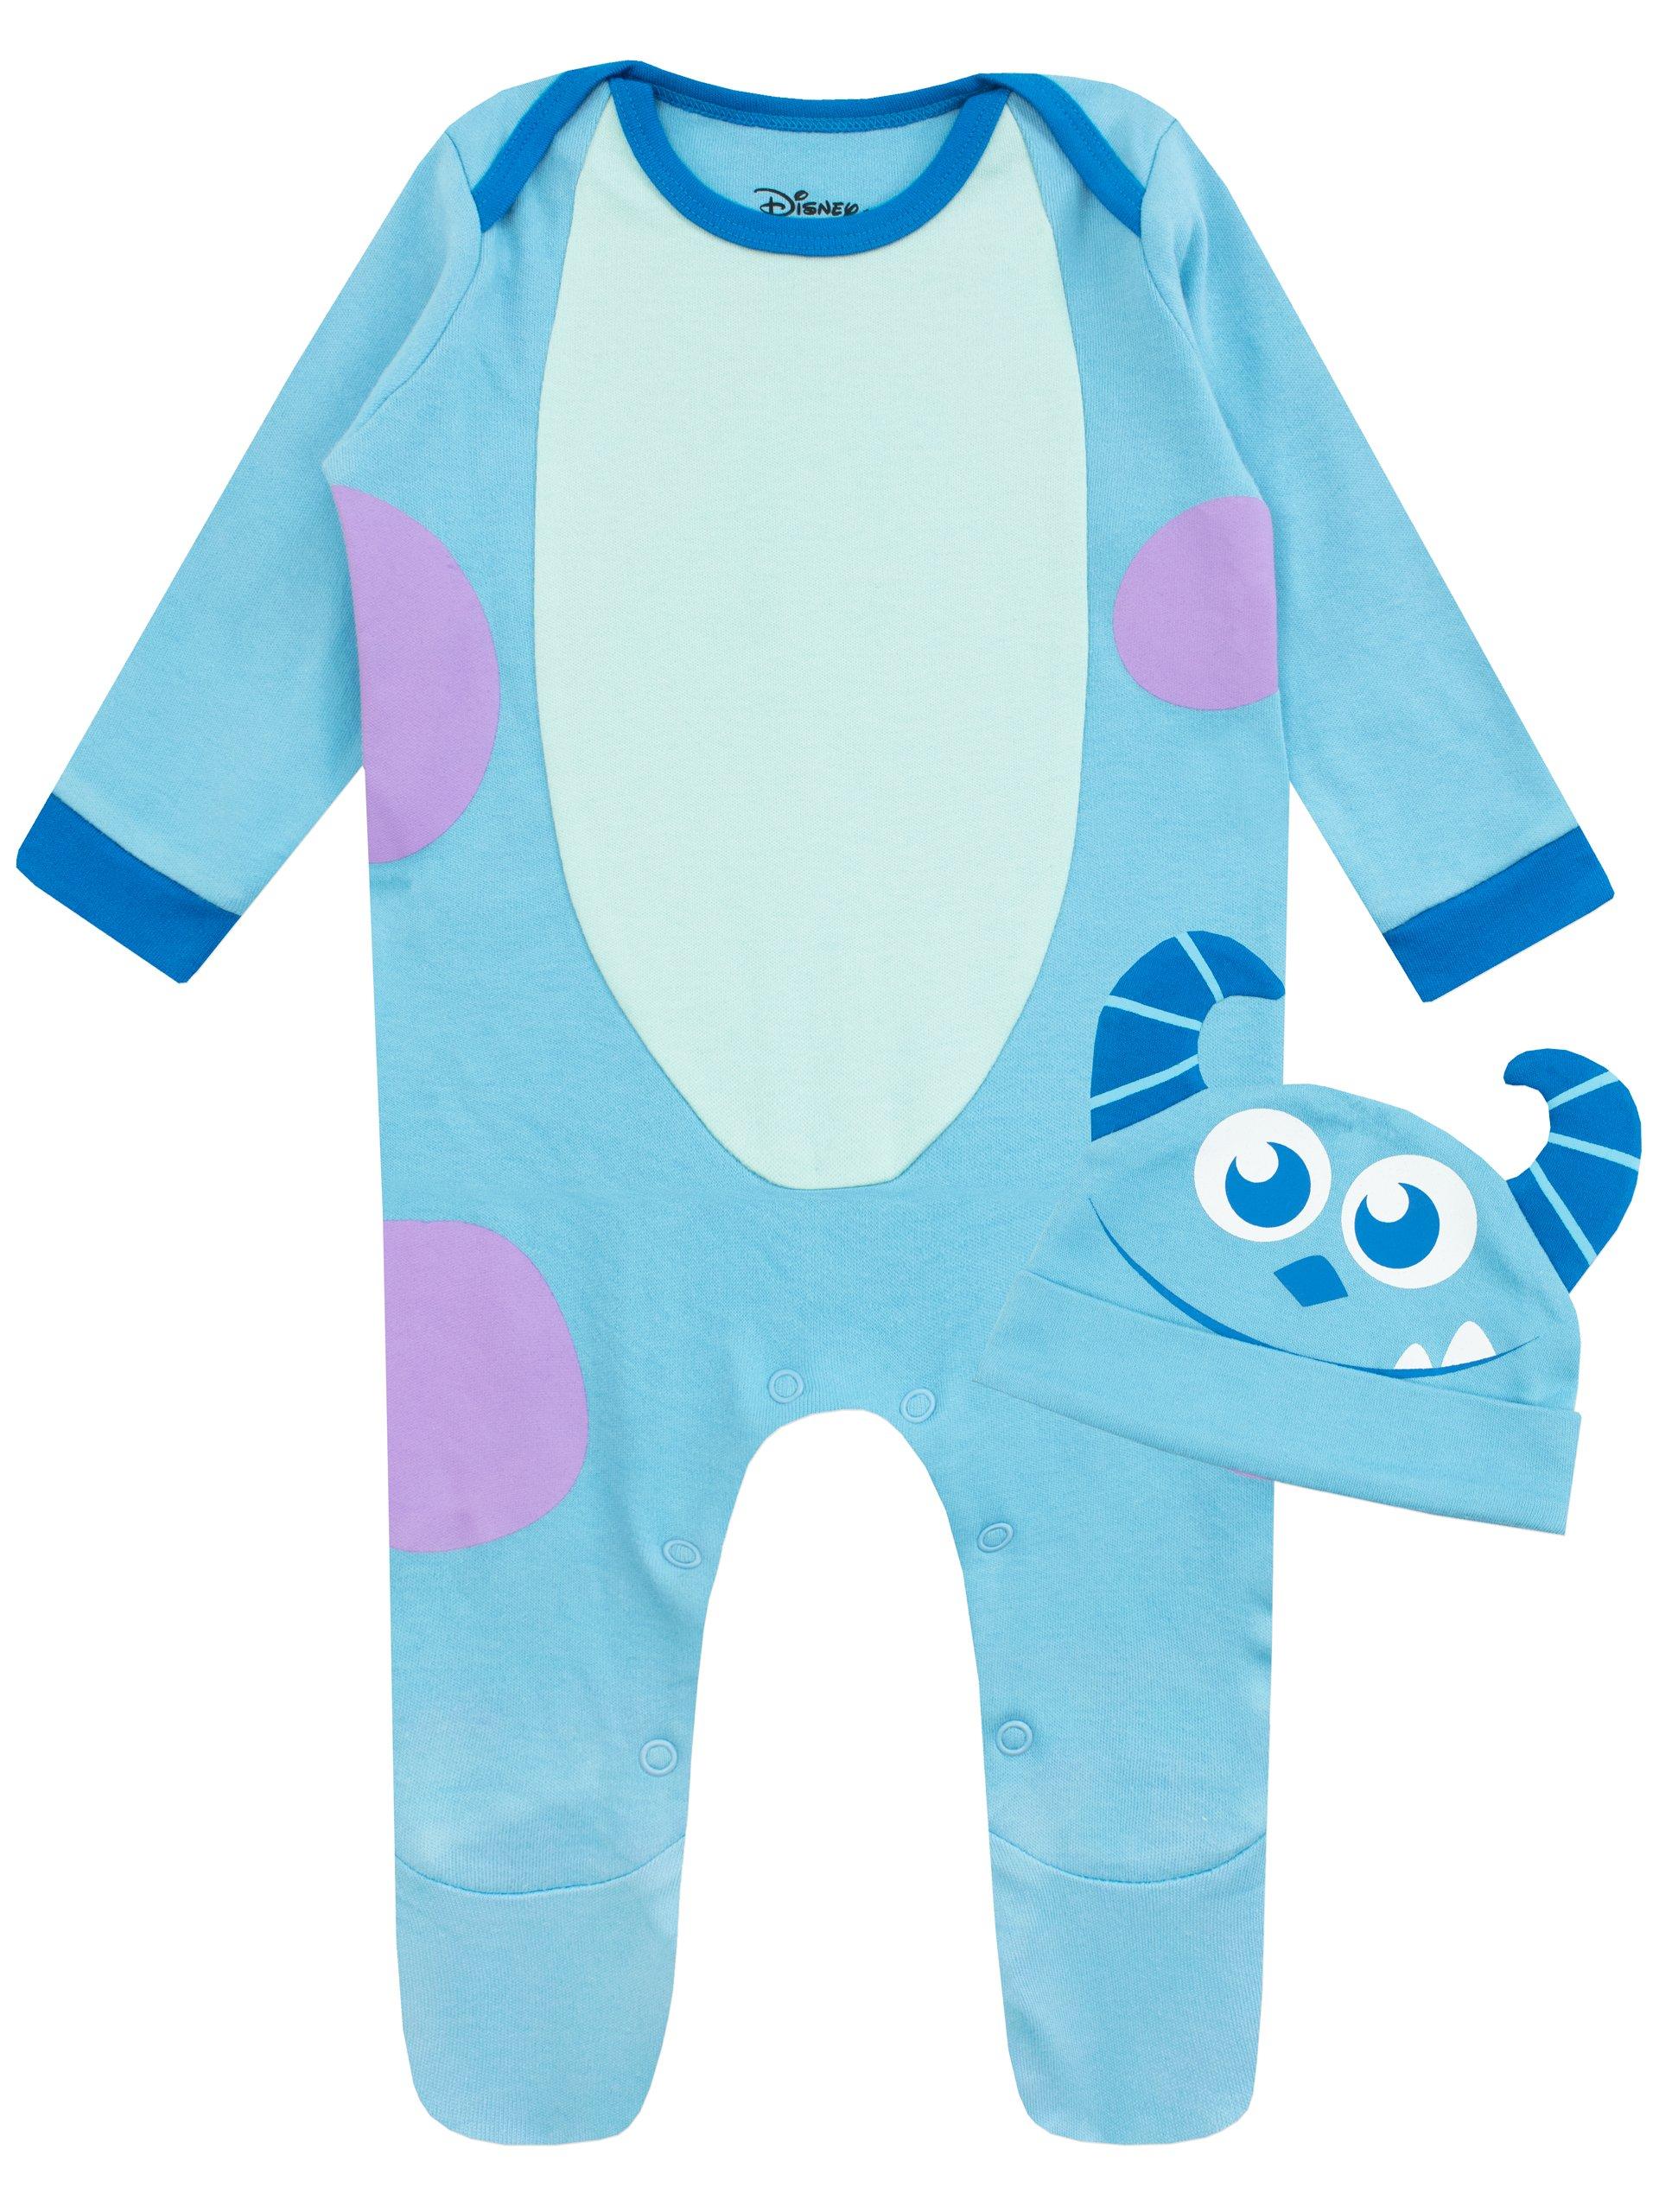 Monsters Inc Baby Sleepsuit Sully